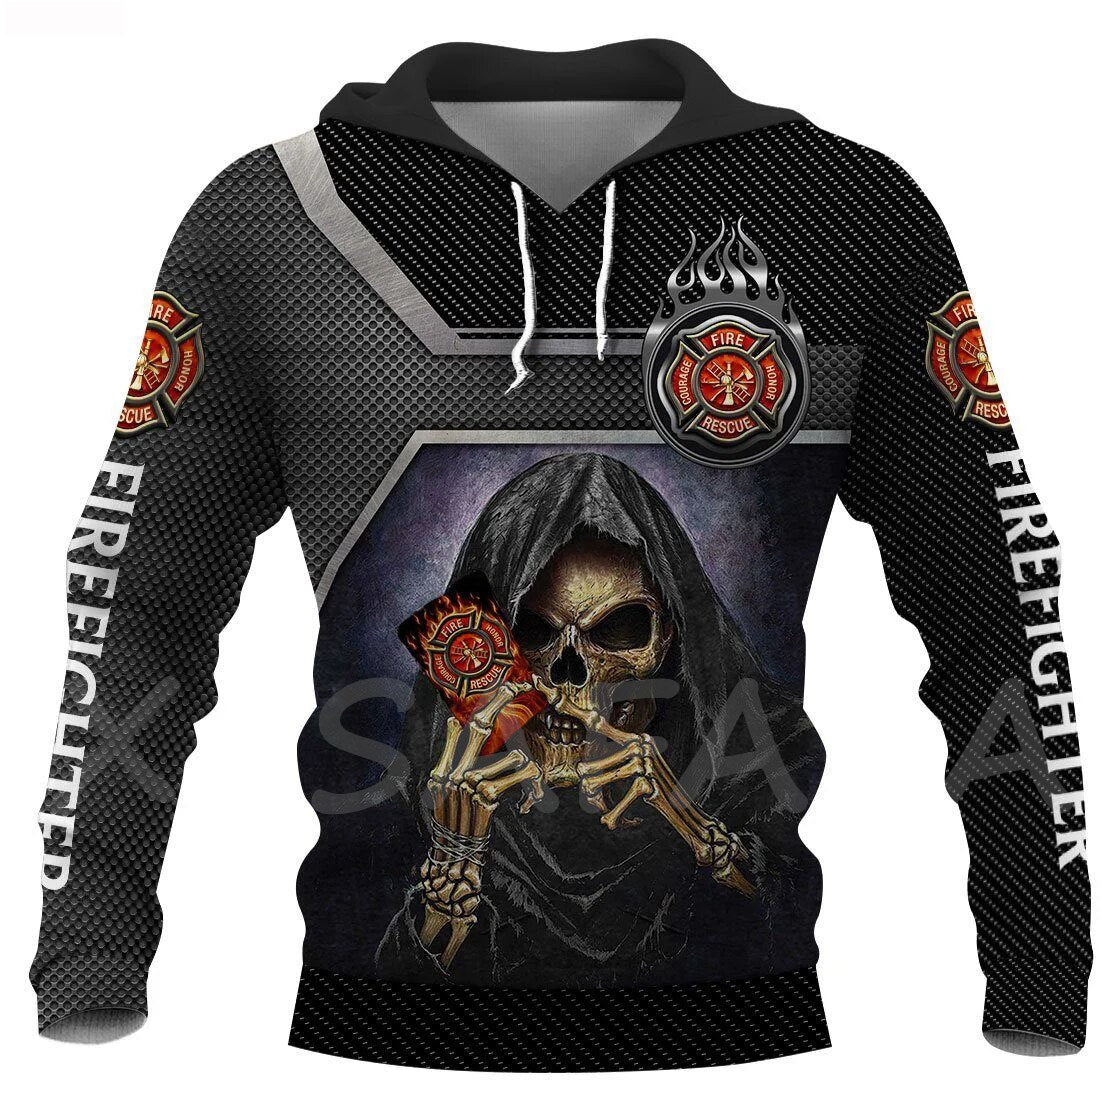 Grim Reaper Firefighter 3D Sublimated Hoodie - Salty Medic Clothing Co.